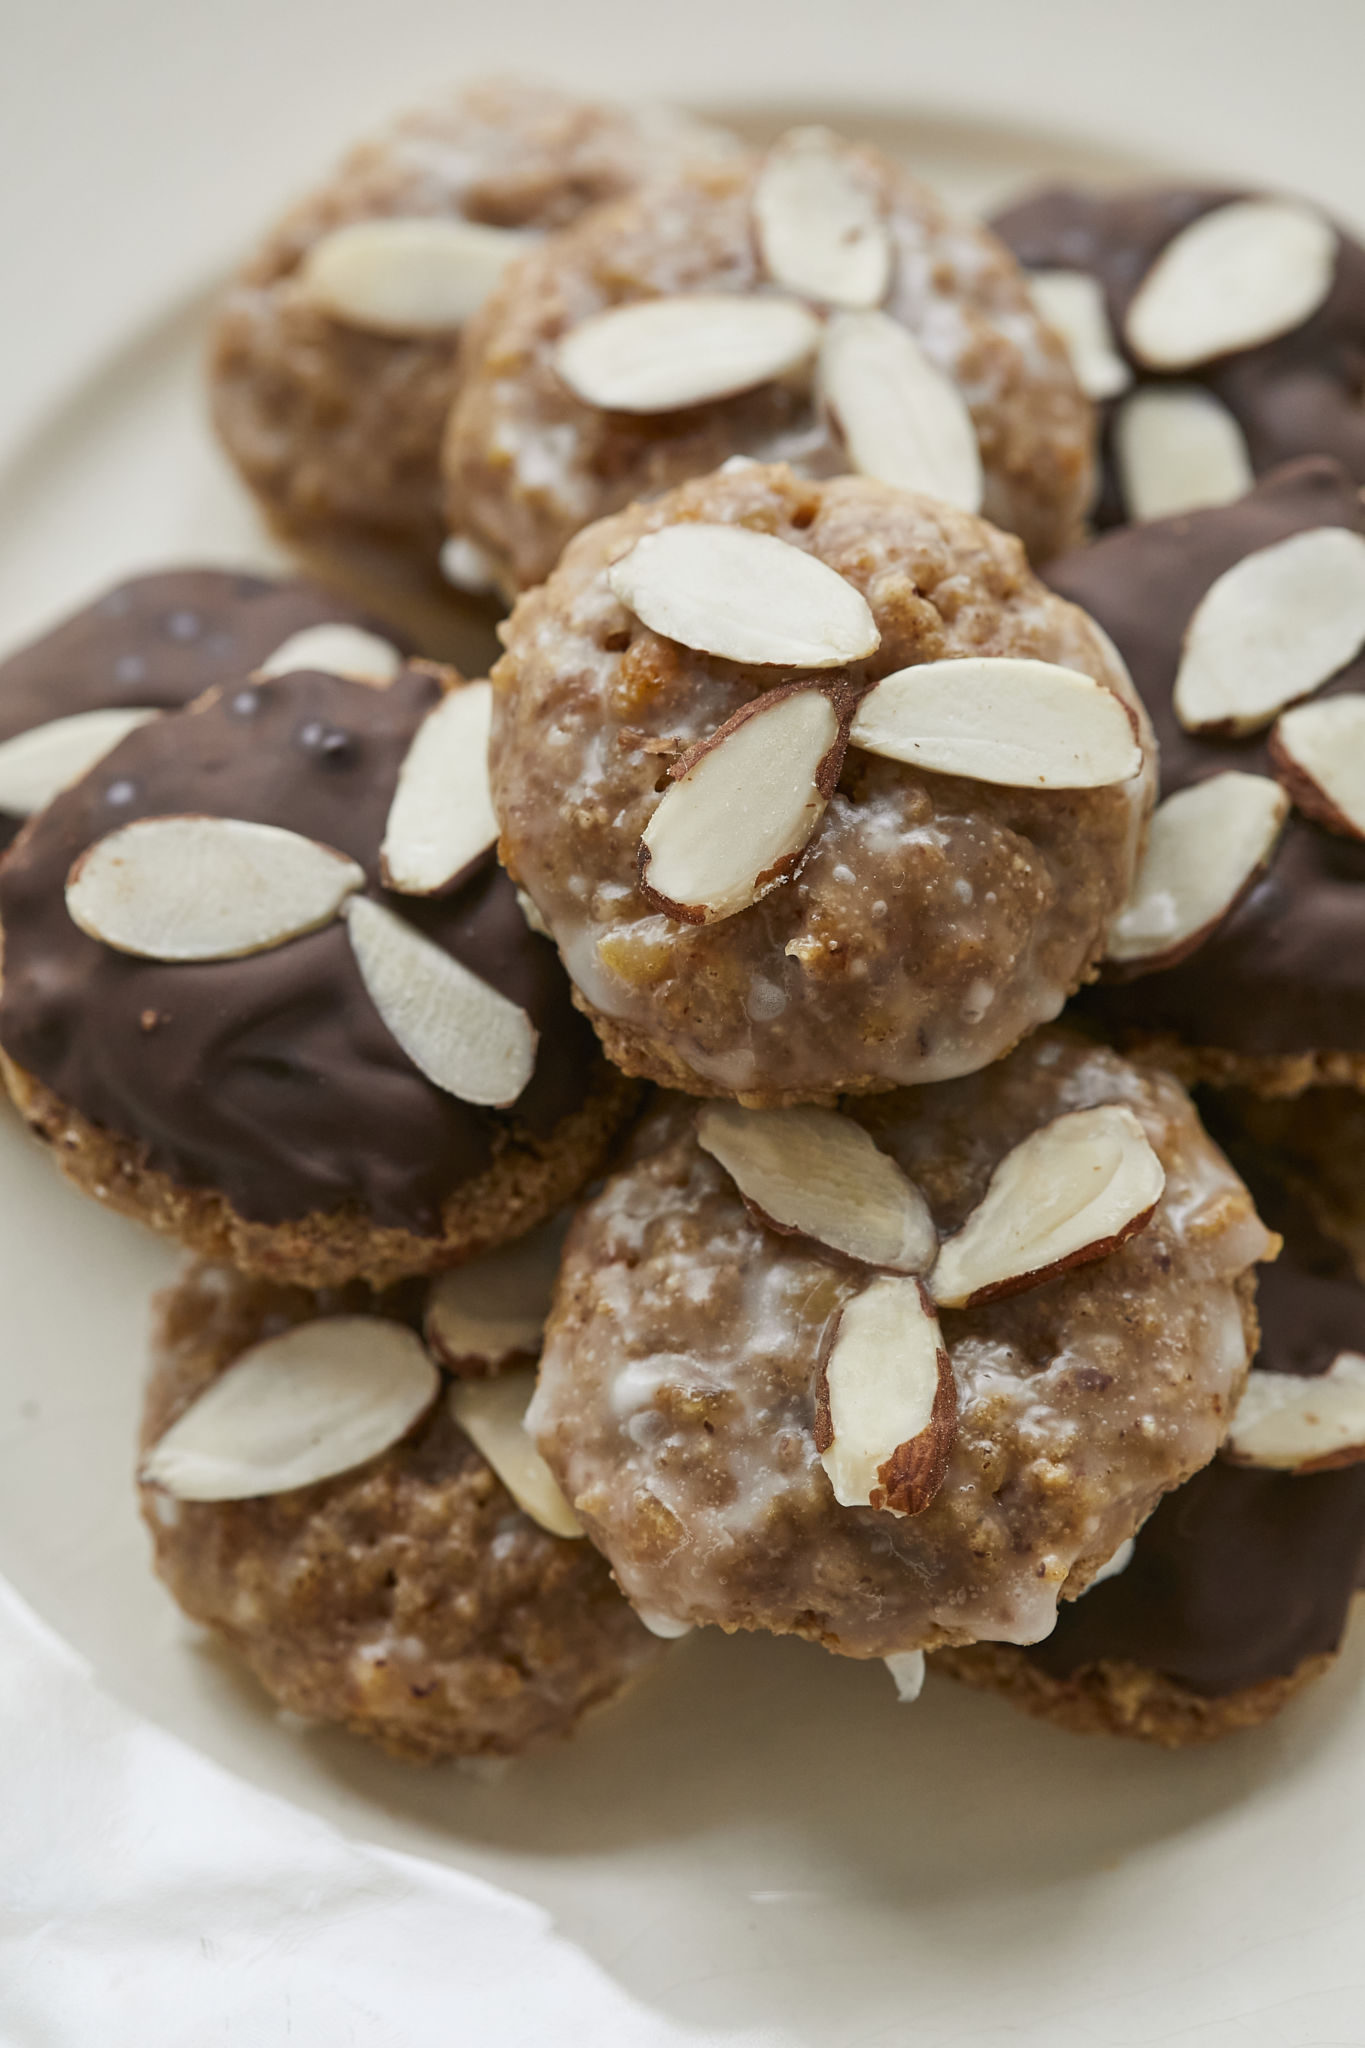 A closeup photo of Lebkuchen show the nutty texture of the cookie dough. The cookies are covered in both a vanilla and chocolate glaze and topped with almonds.